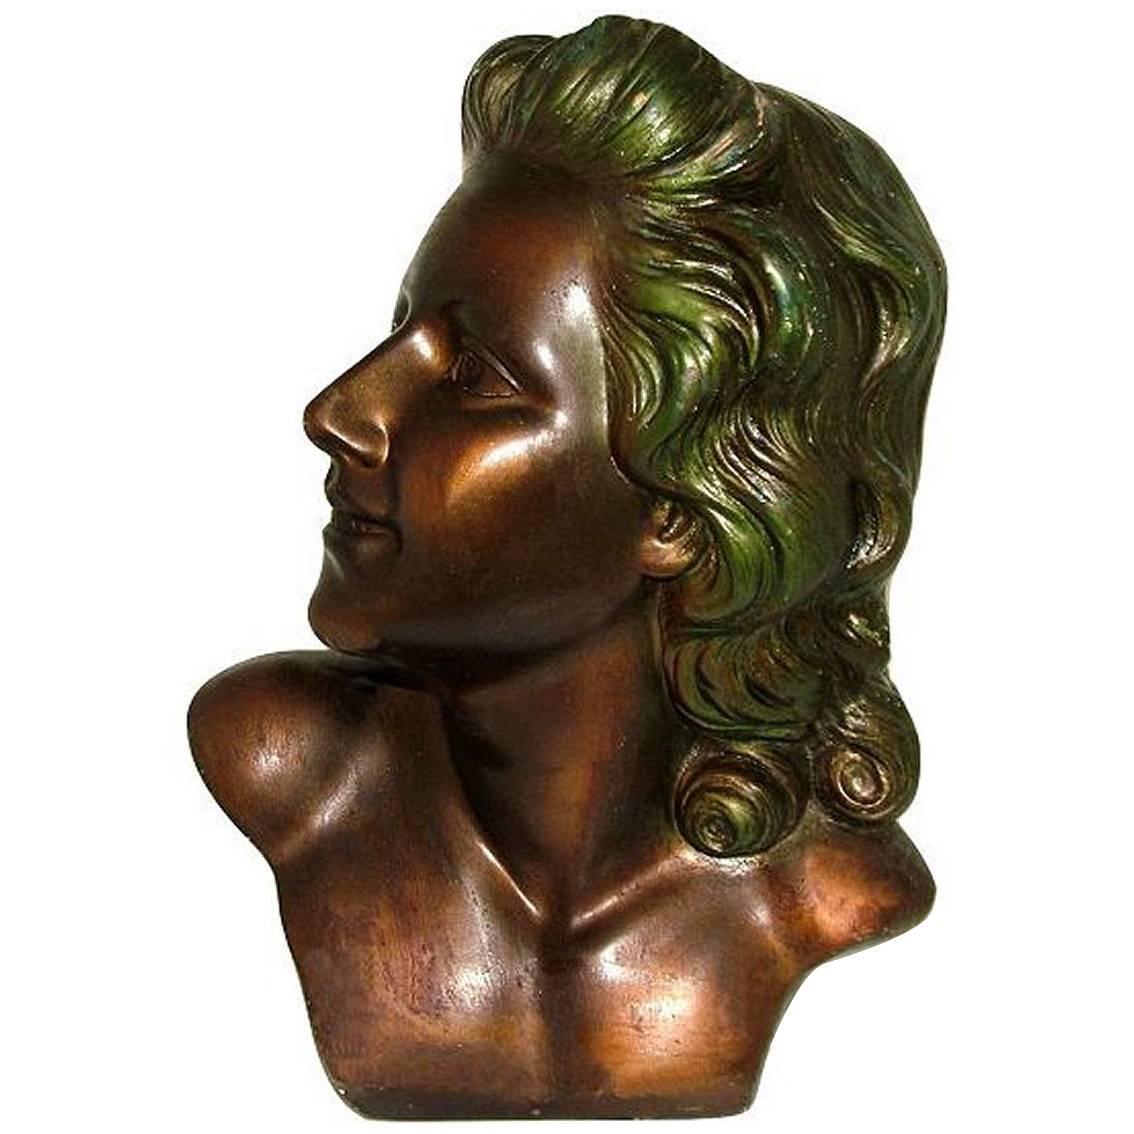 Beautiful Art Deco, French Bust of a Young Woman